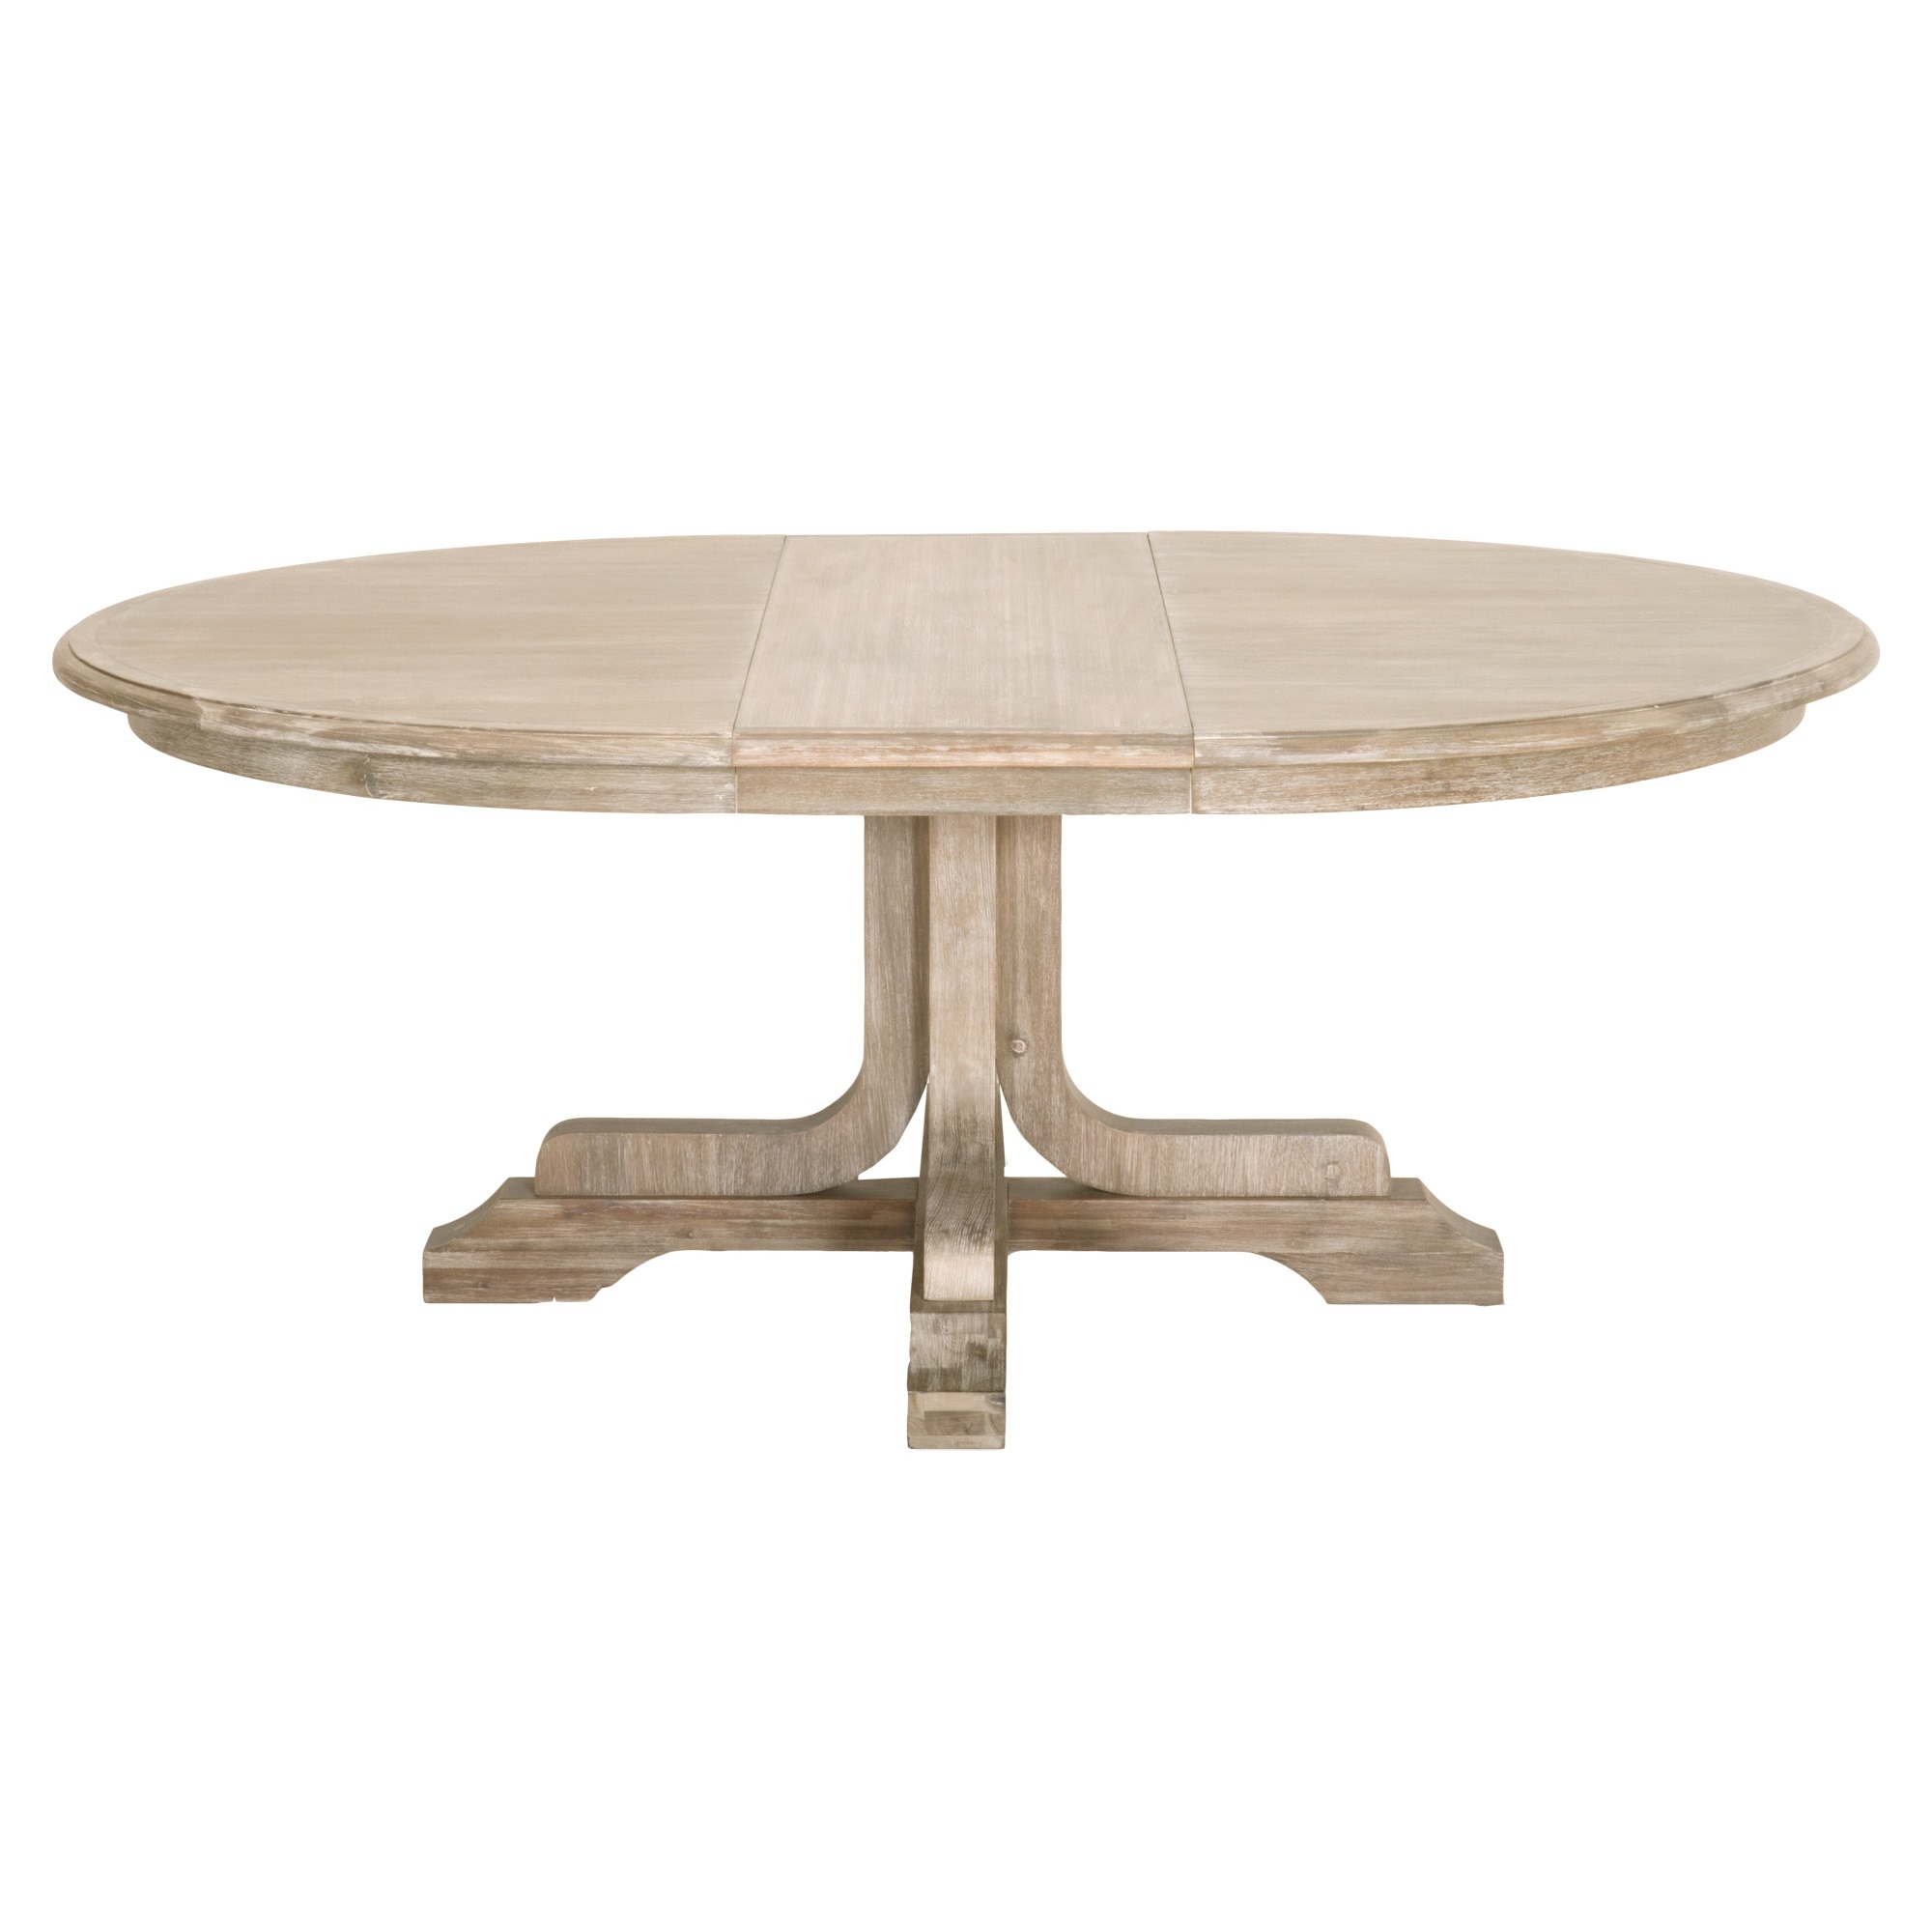 Torrey 60" Round Extension Dining Table - Image 1